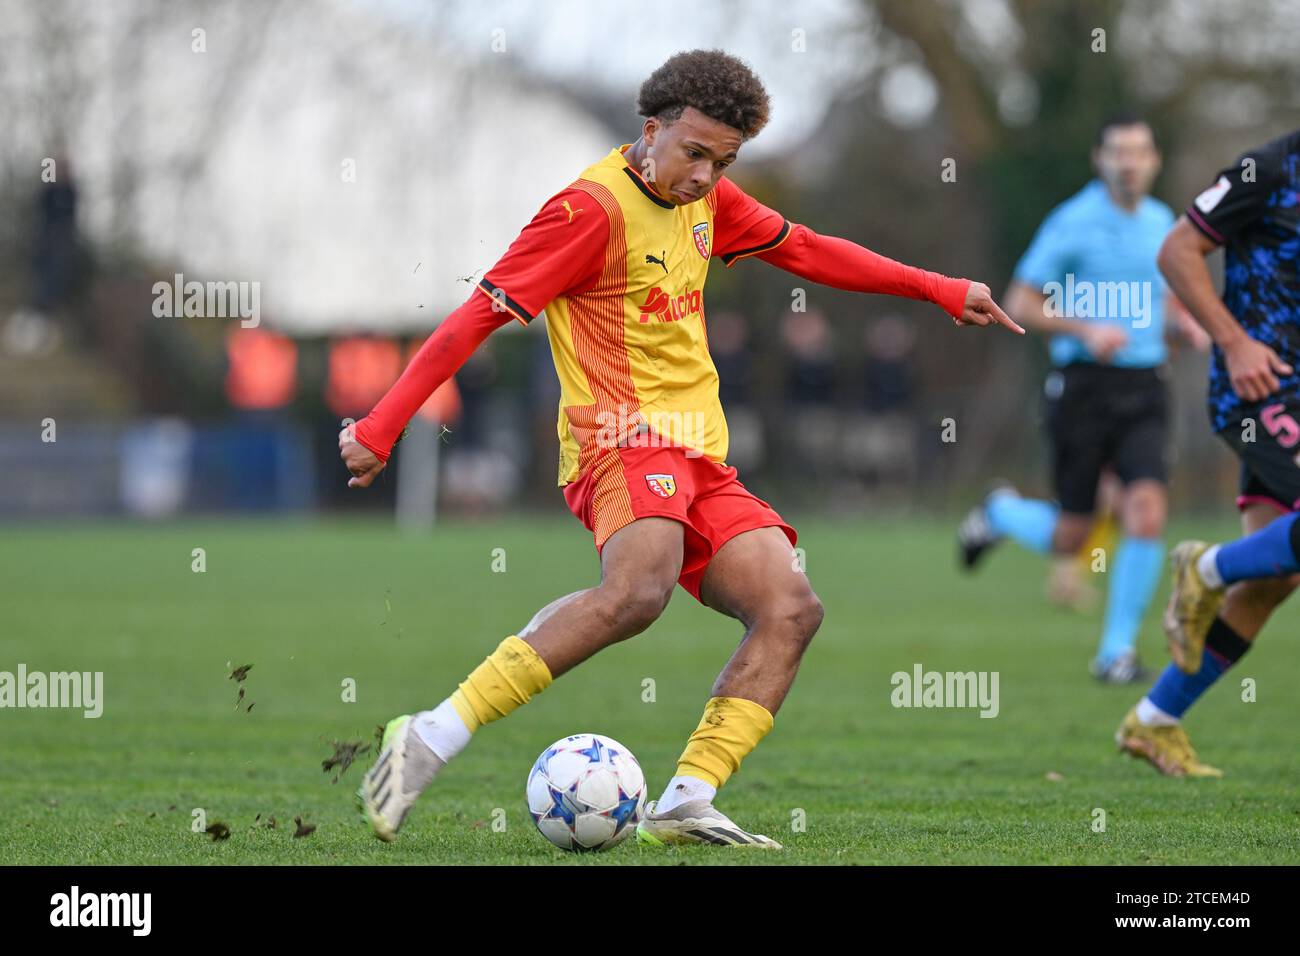 Lens, France. 12th Dec, 2023. Kembo Diliwidi (13) of RC Lens pictured in action during the Uefa Youth League matchday 6 game in group B in the 2023-2024 season between the youth teams Under-19 of Racing Club de Lens and FC Sevilla on December 12, 2023 in Lens, France. (Photo by David Catry/Isosport) Credit: sportpix/Alamy Live News Stock Photo